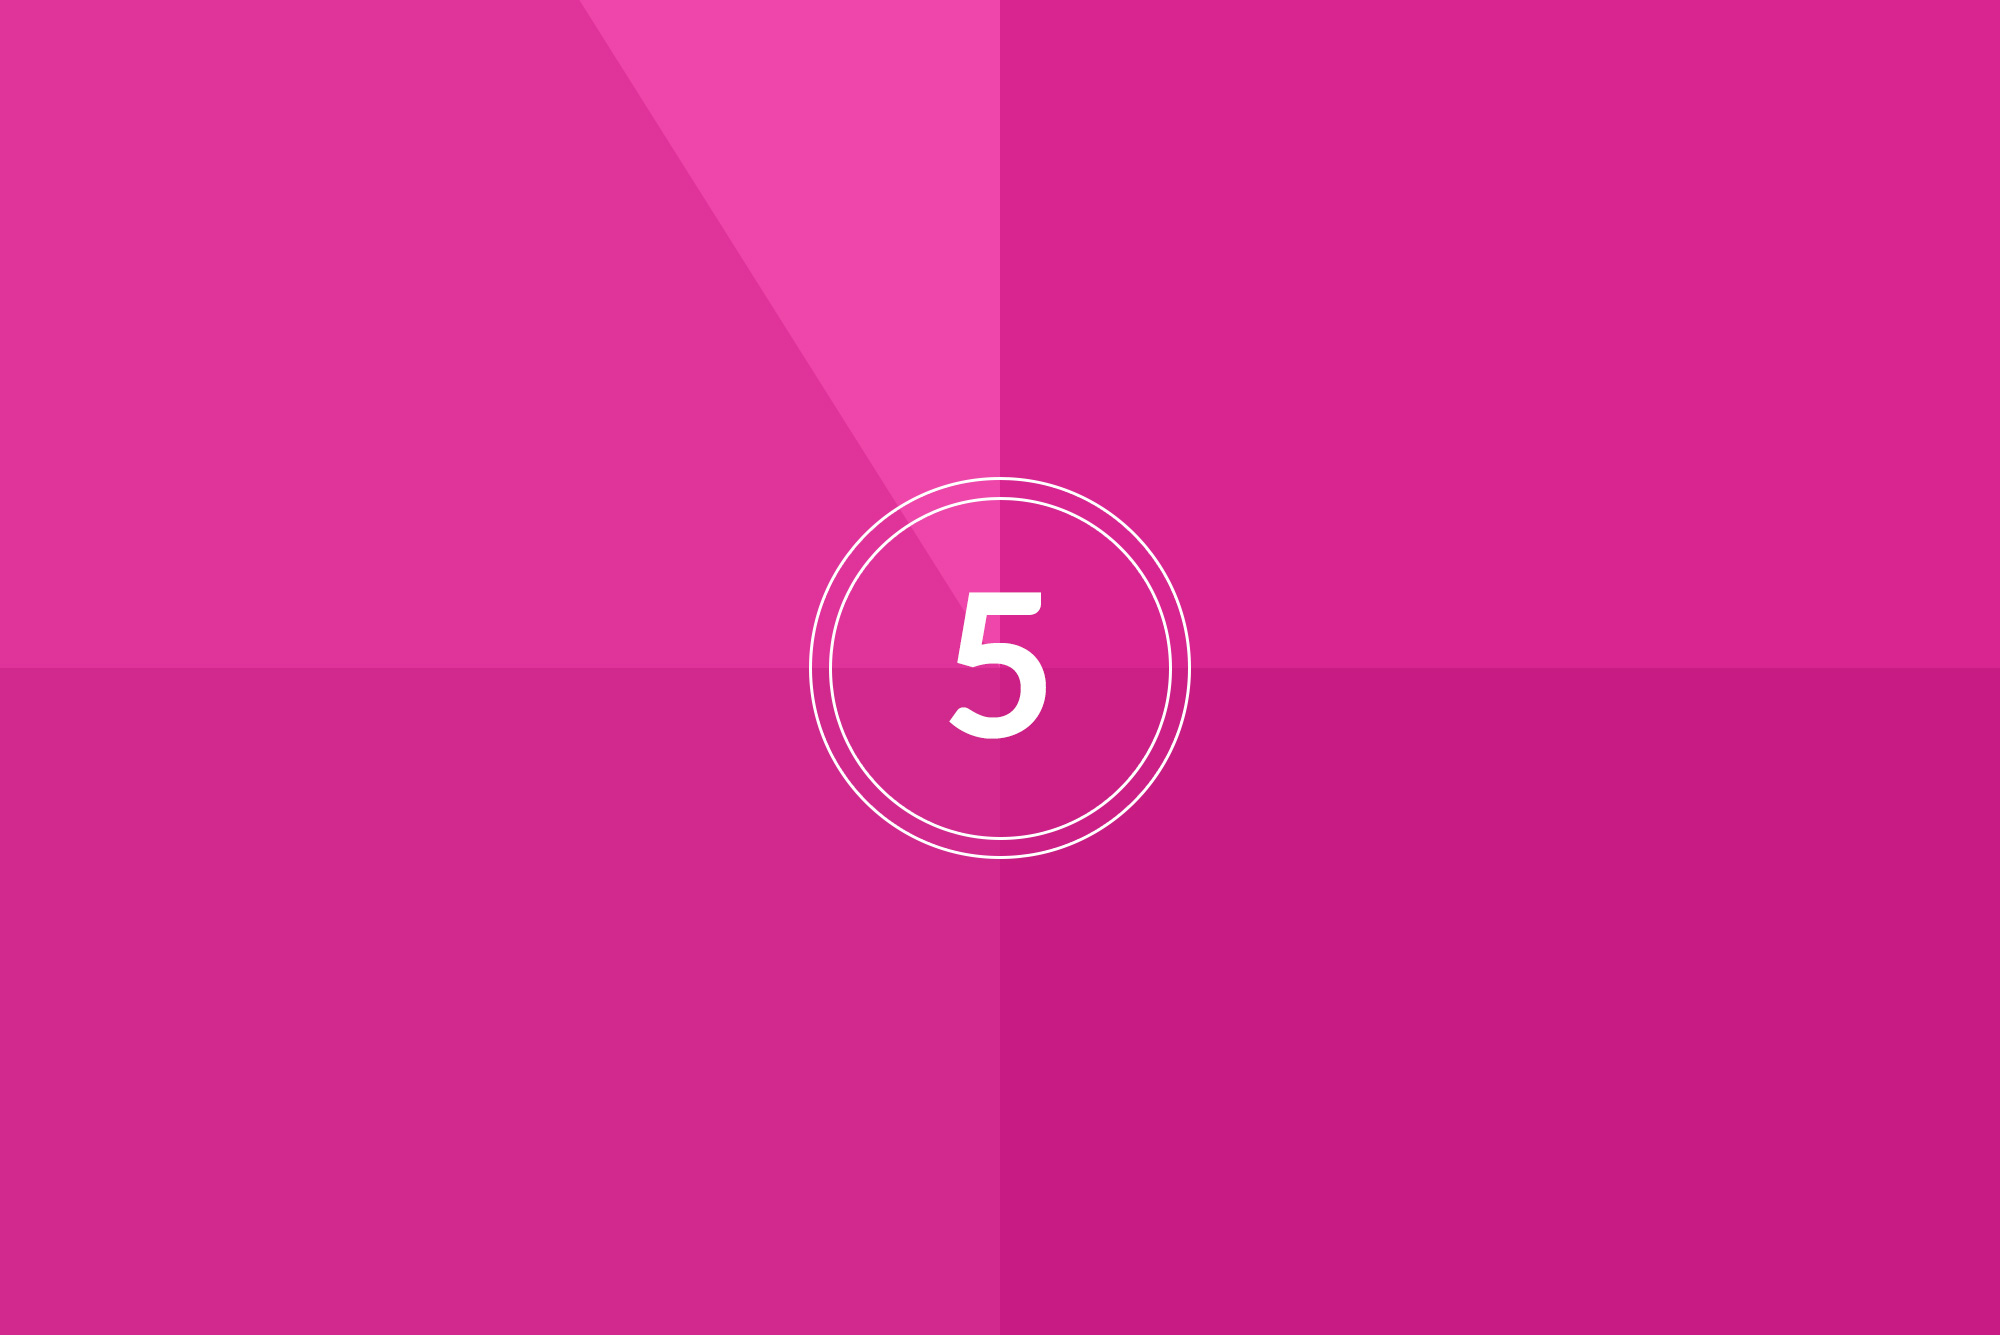 Countdown on pink background - Quality content